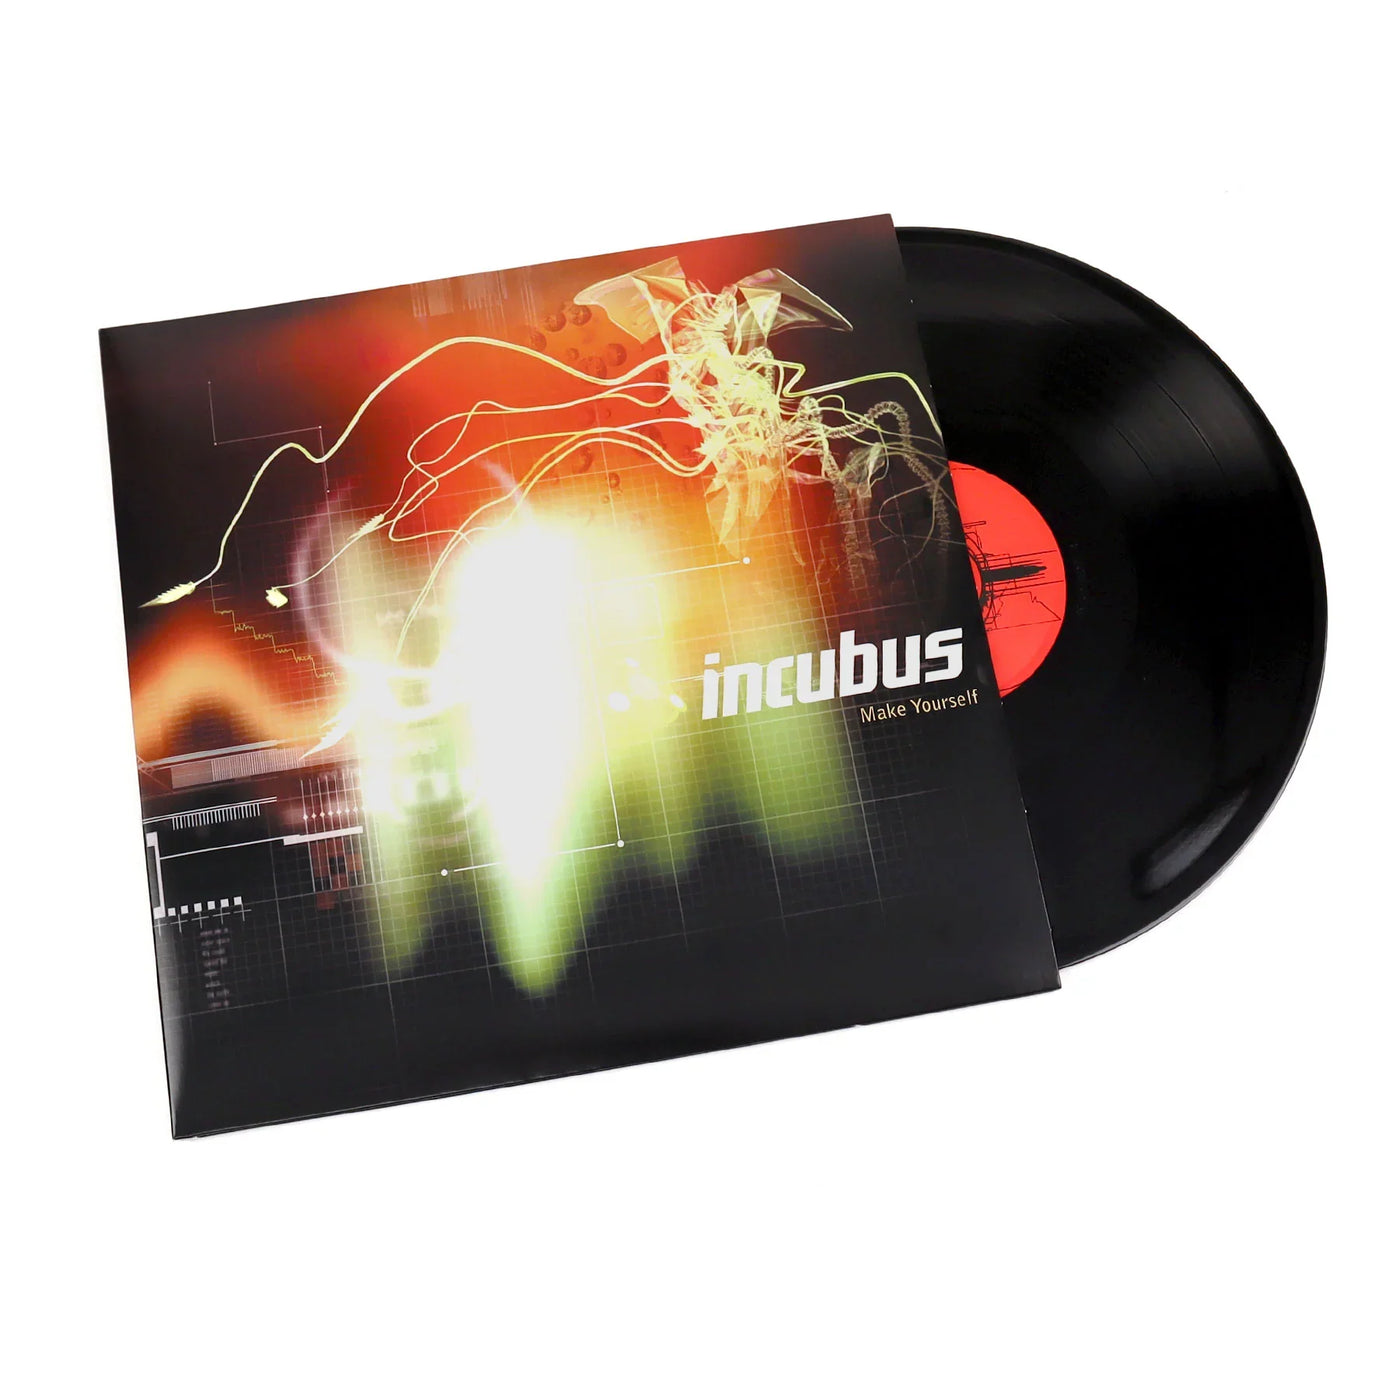 NEW/SEALED! Incubus - Make Yourself